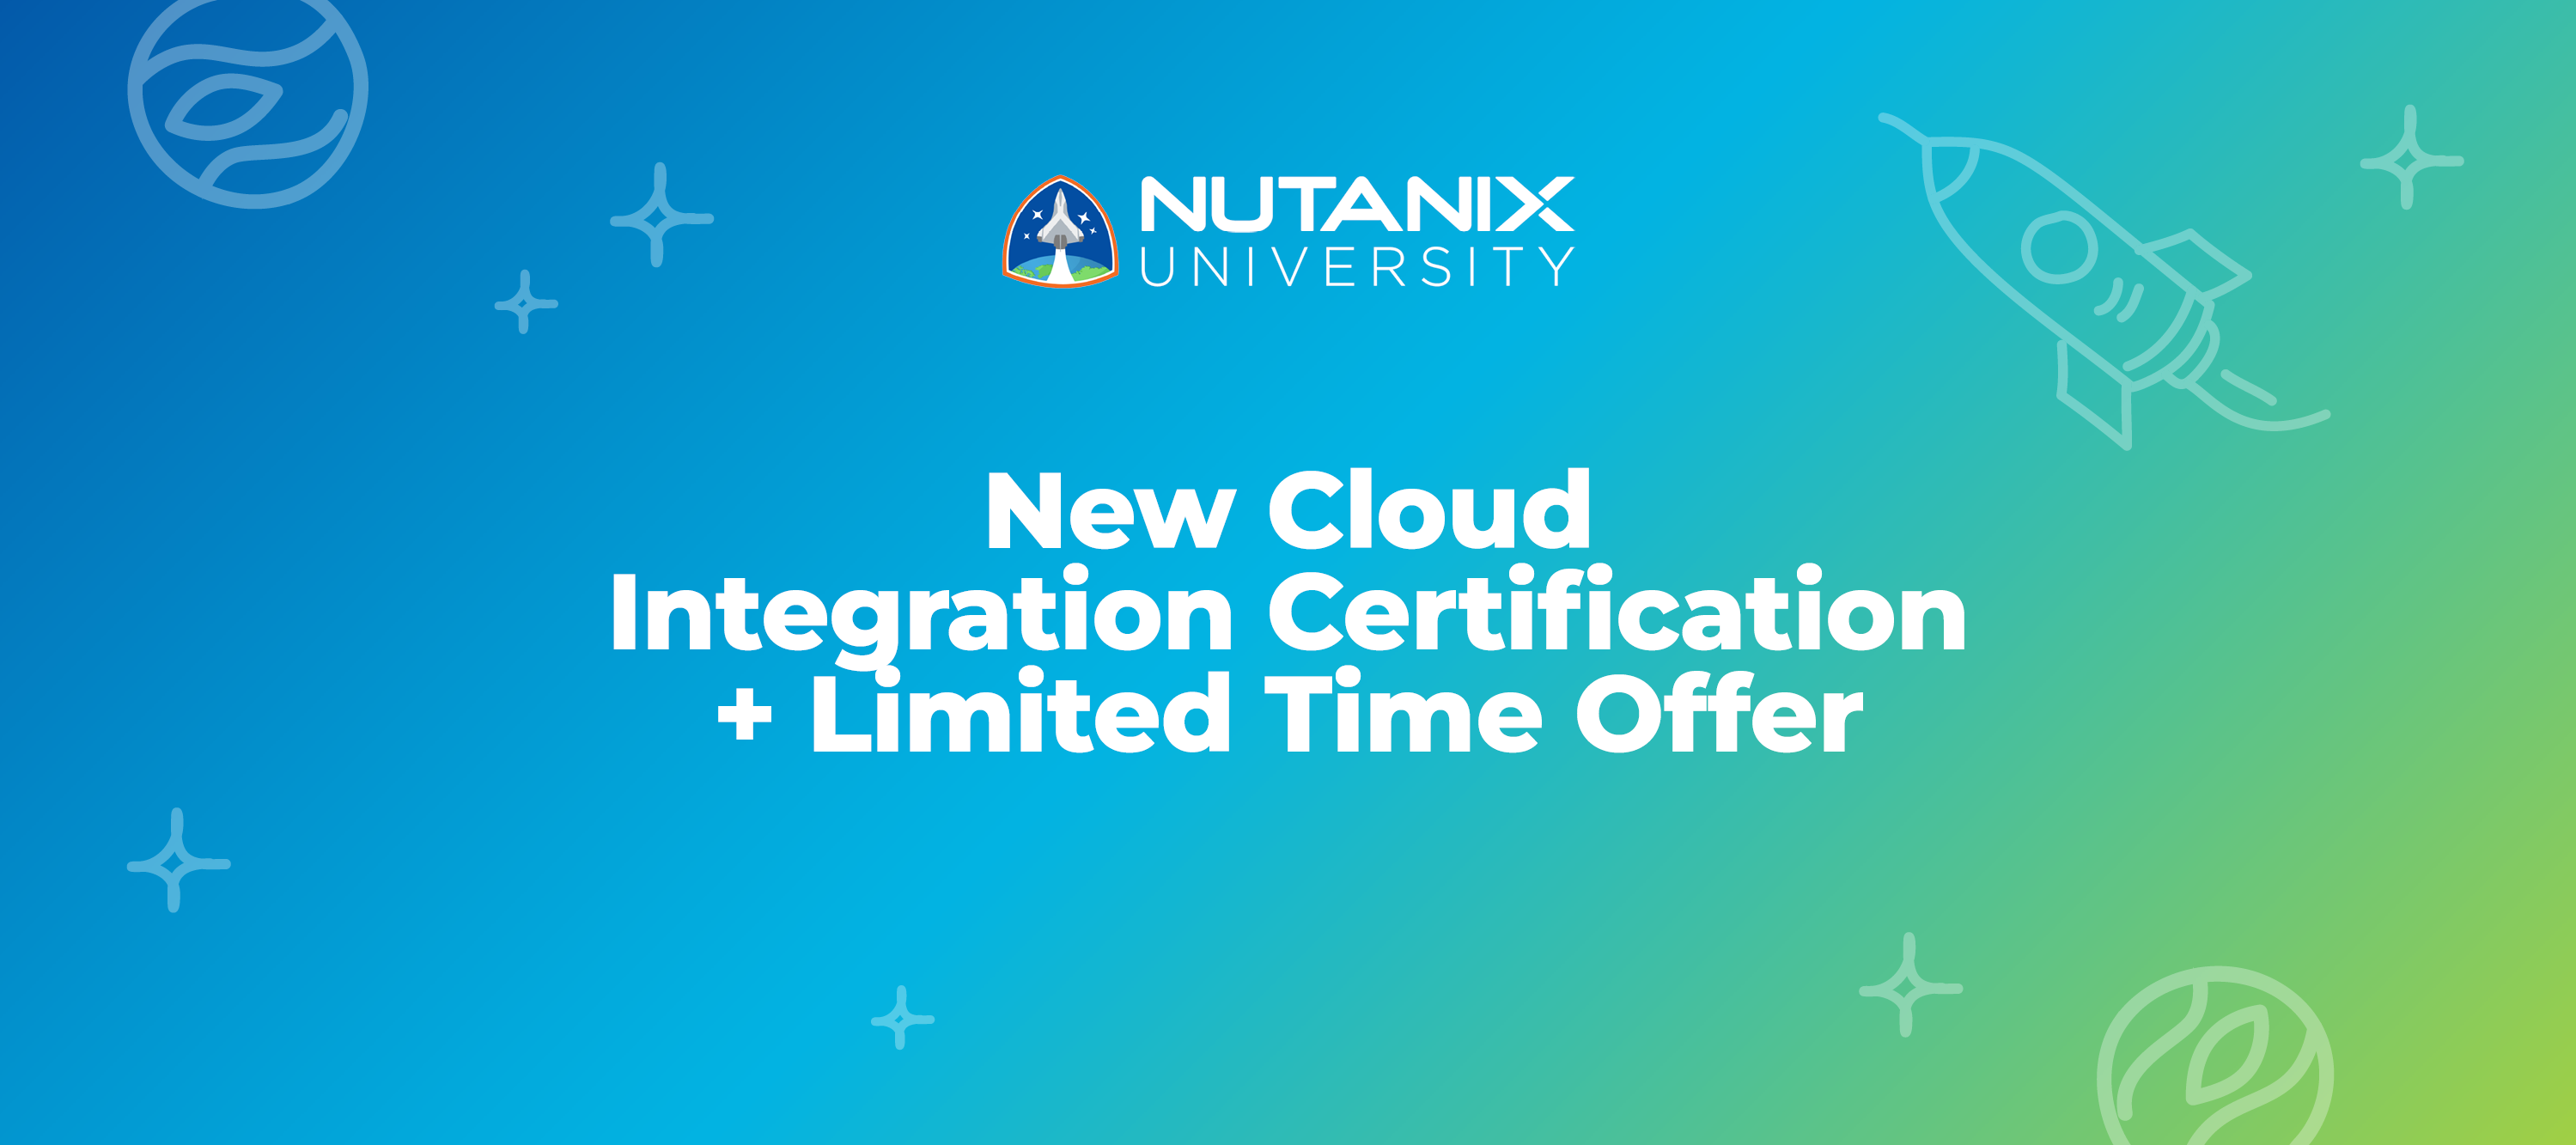 New Cloud Integration Certification + Limited Time Offer